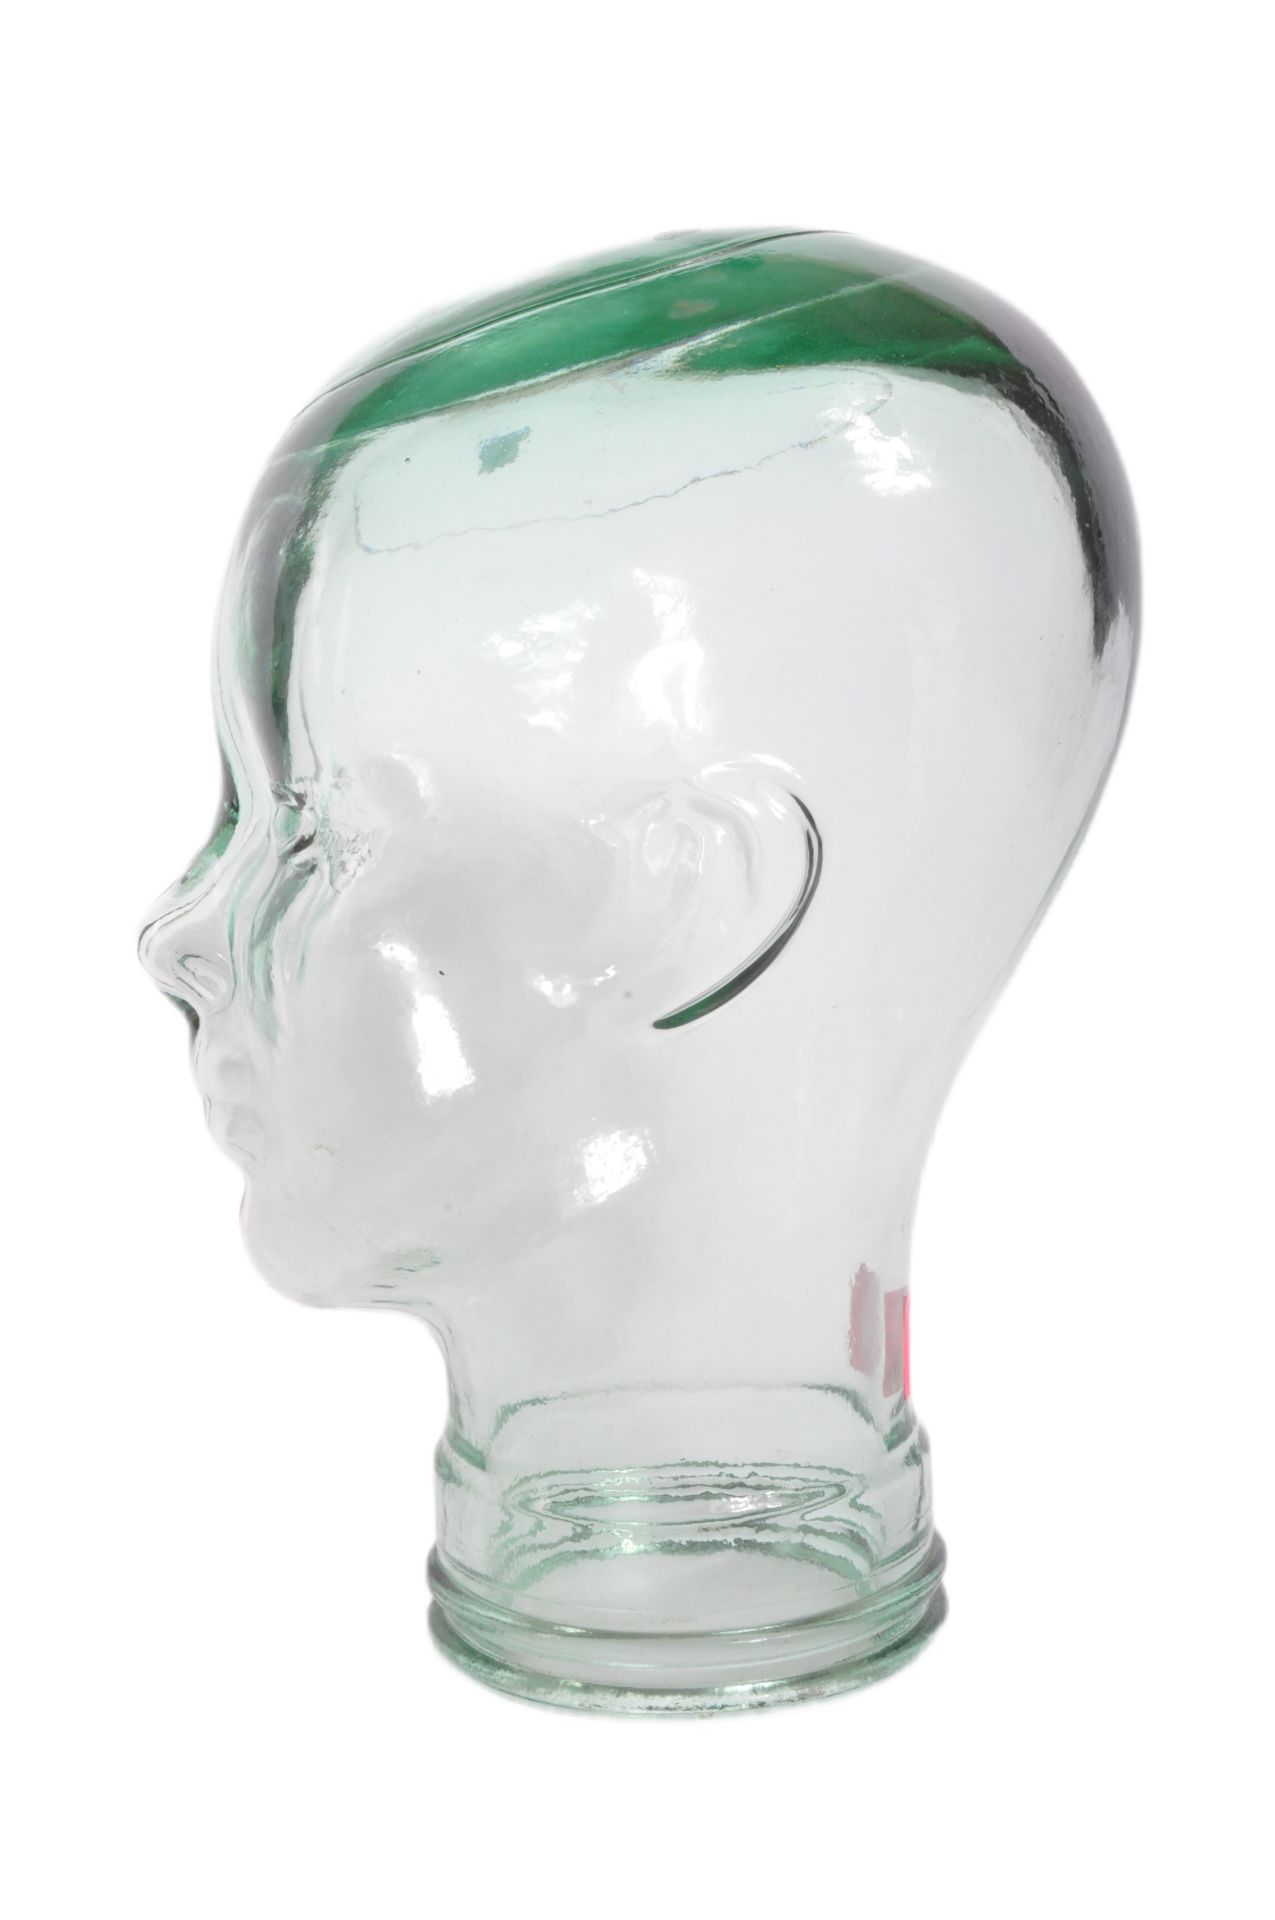 ART DECO STYLE GLASS MALE SHOP DISPLAY HEAD IN GREEN GLASS